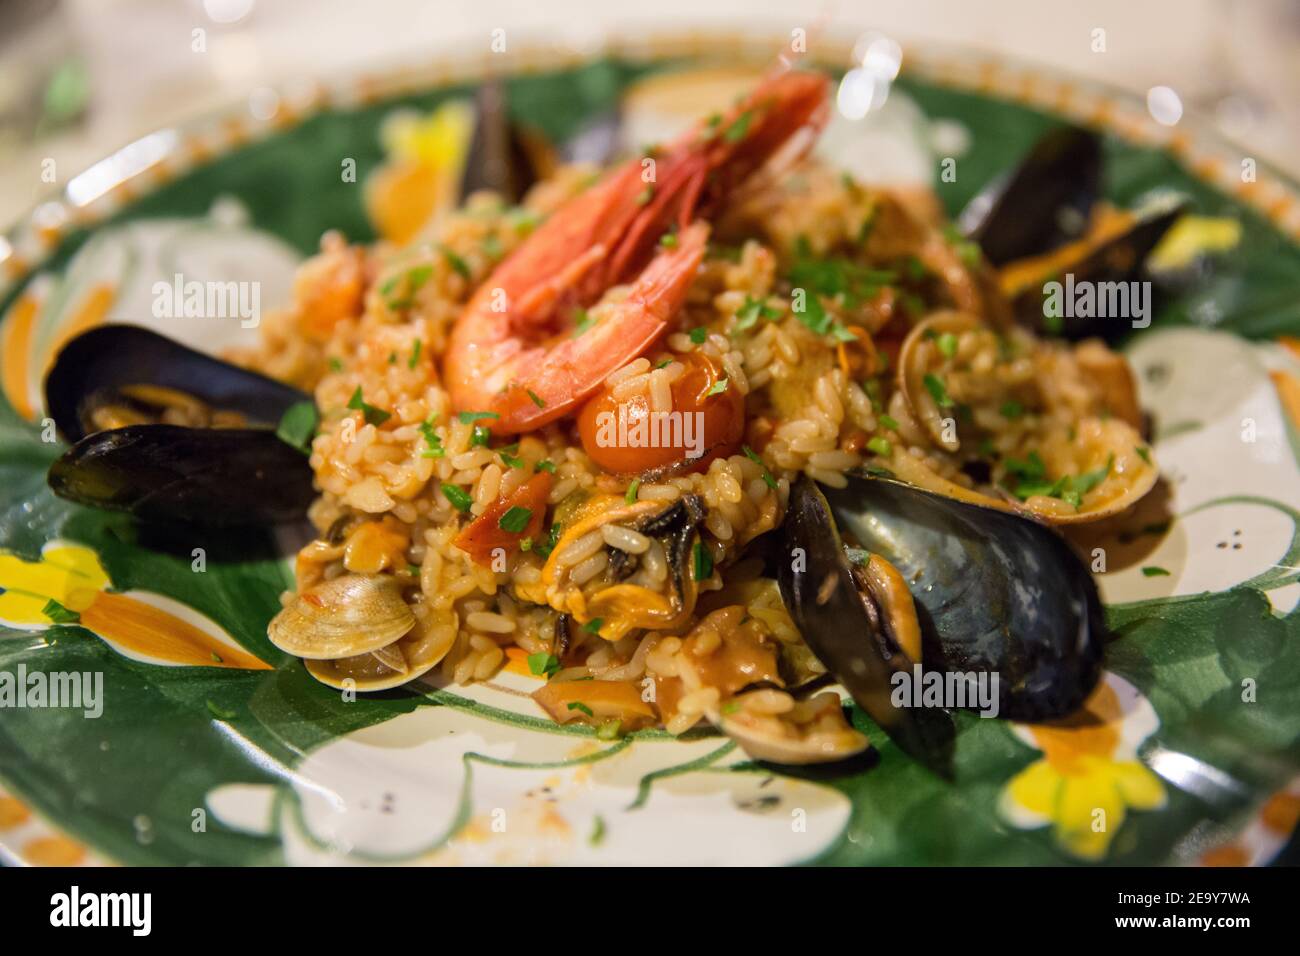 Italian food: seafood risotto with grilled prawn and mussels on a hand-painted ceramic plate of the island of Capri, Tyrrhenian sea, Italy Stock Photo